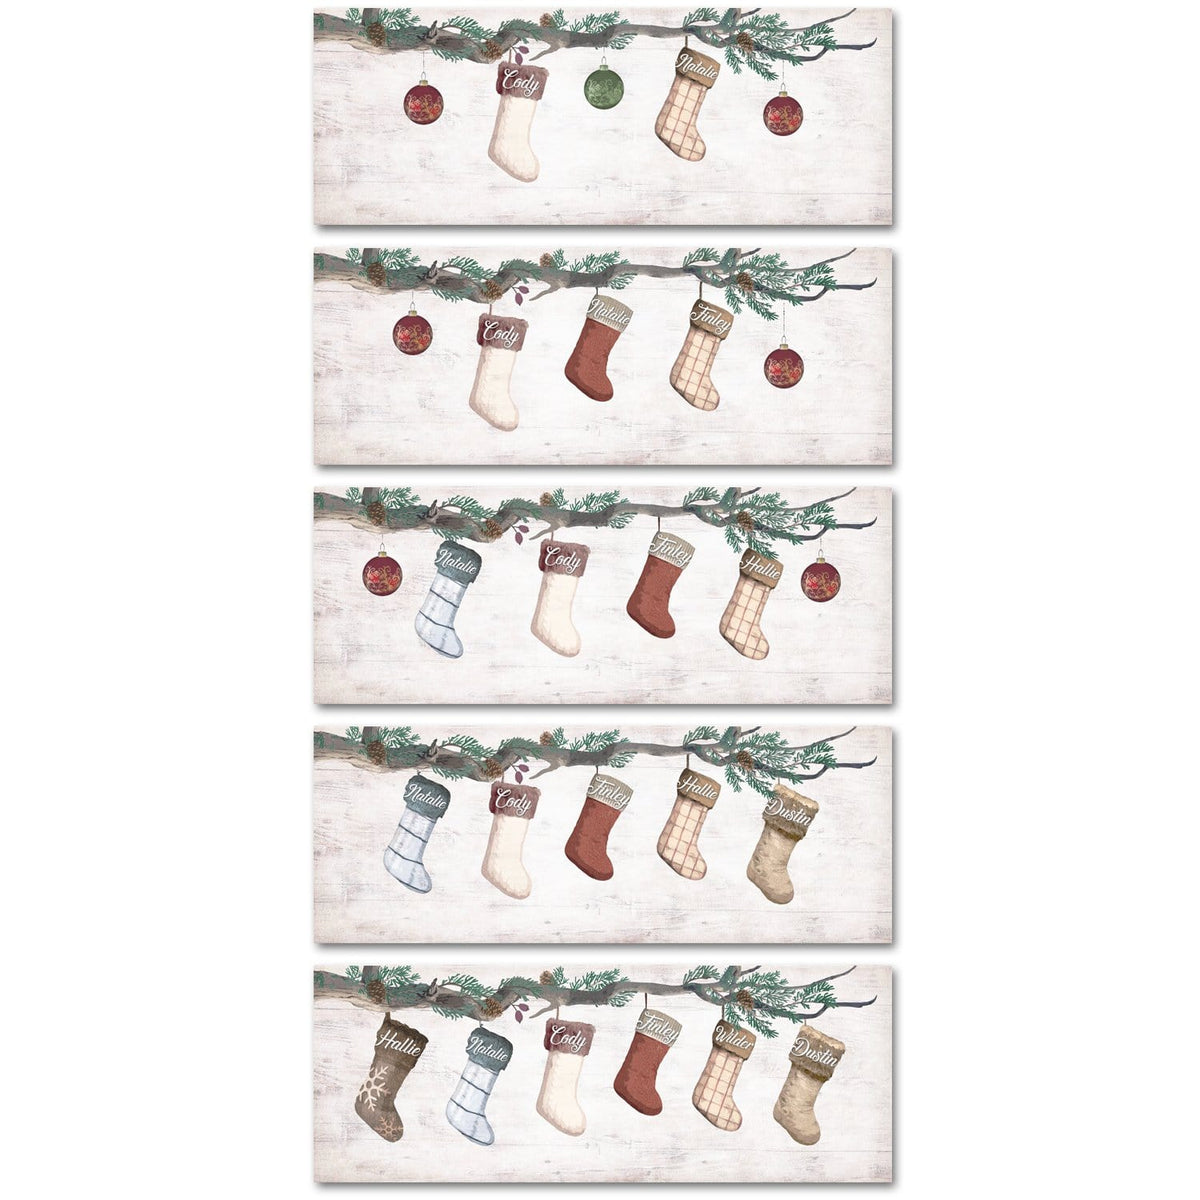 2-6 stockings shown as a wood block mount